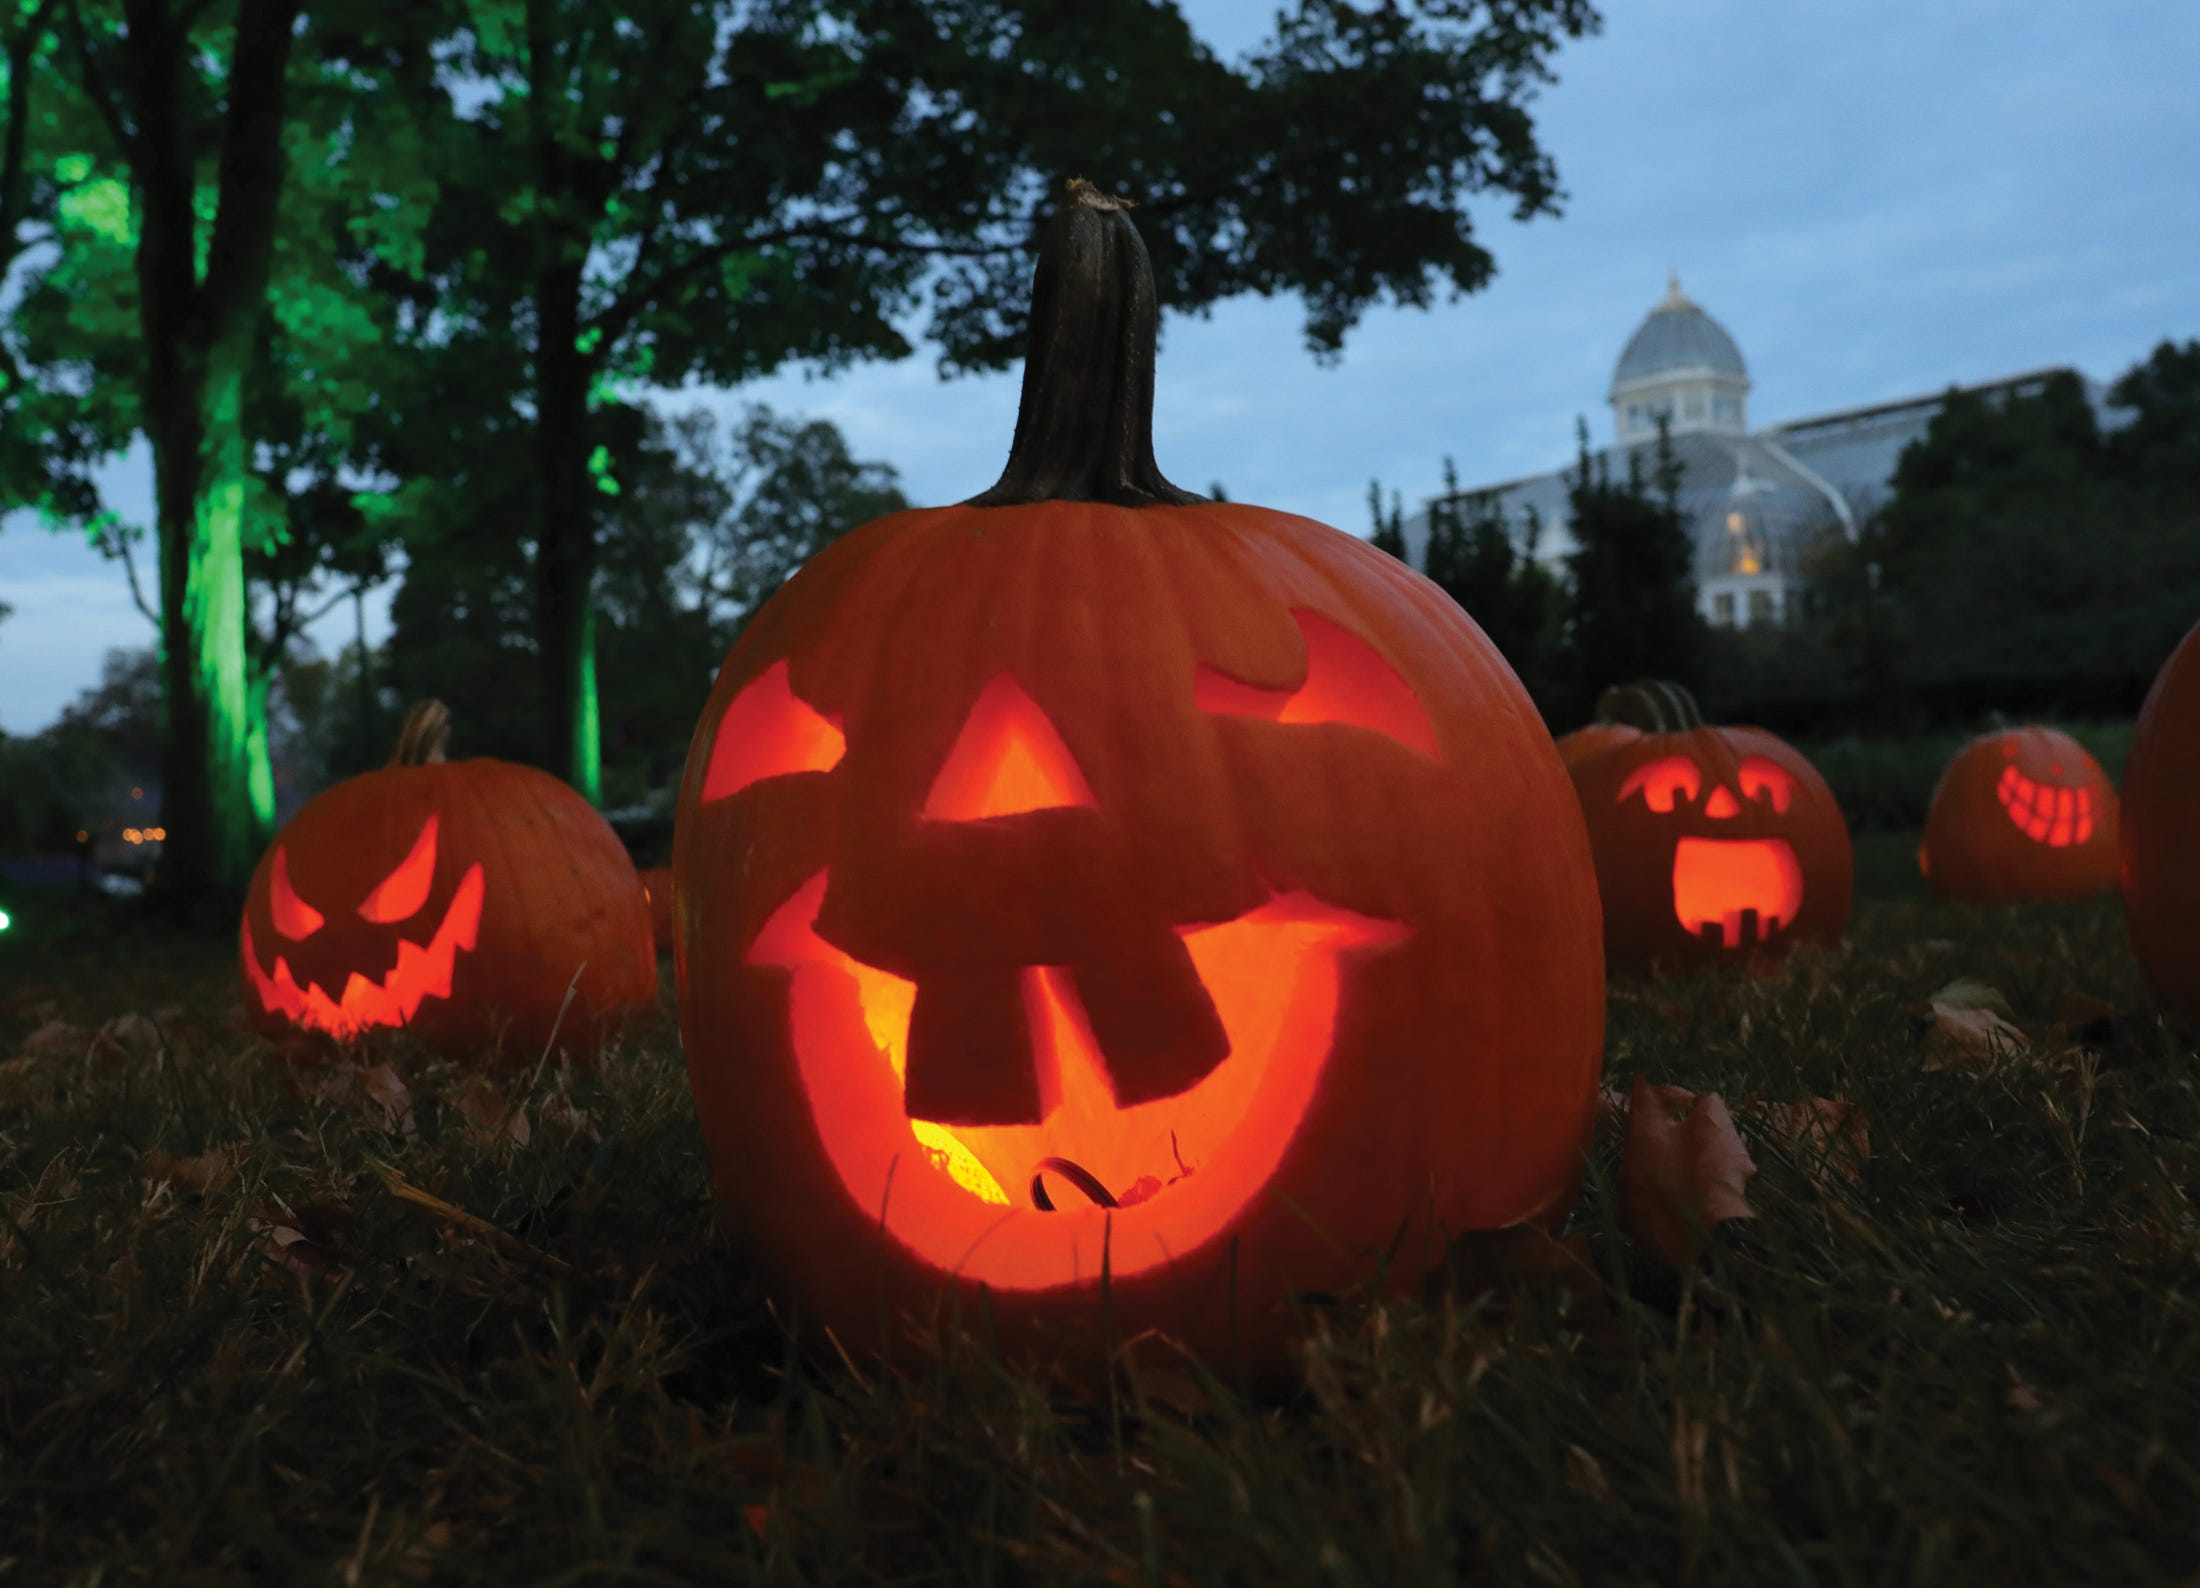 A scene from the 2021 installment of Pumpkins Aglow at Franklin Park Conservatory and Botanical Gardens